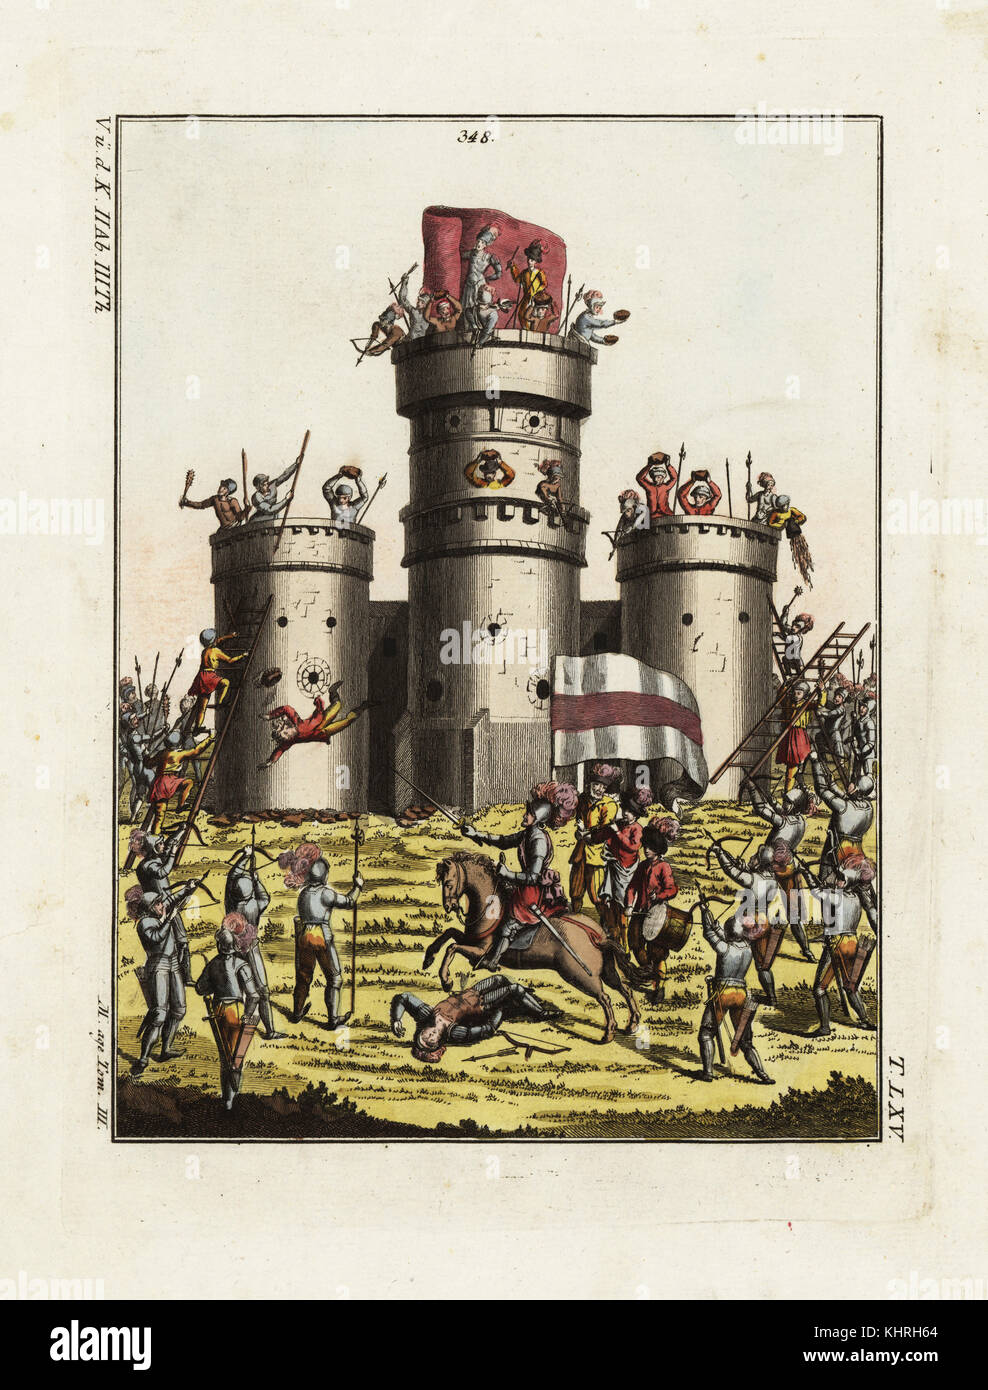 Siege of a medieval castle. Knights in armour, archers and soldiers on ladders storm a castle defended by soldiers throwing rocks and boiling oil. From a manuscript of tournaments in the collection of HRE Maximilian I. Handcoloured copperplate engraving from Robert von Spalart's Historical Picture of the Costumes of the Principal People of Antiquity and of the Middle Ages, Chez Collignon, Metz, 1810. Stock Photo